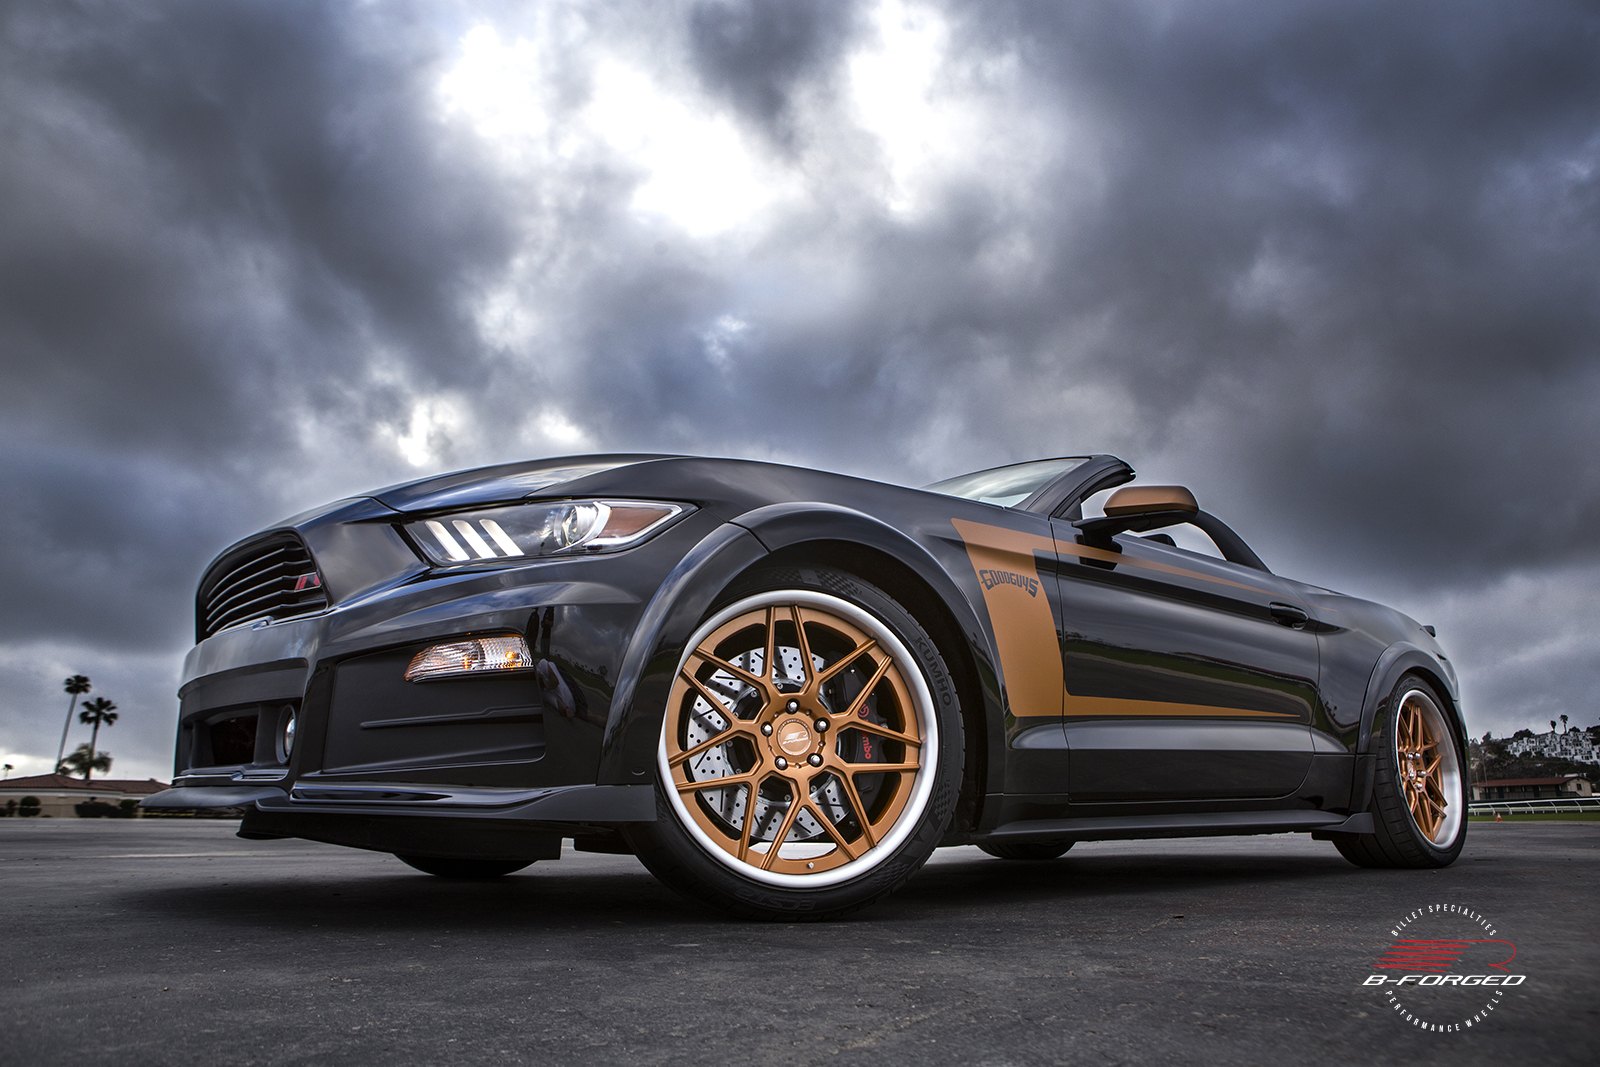 Black Convertible Ford Mustang with B-Forged Custom Rims - Photo by B-Forged Performance Wheels